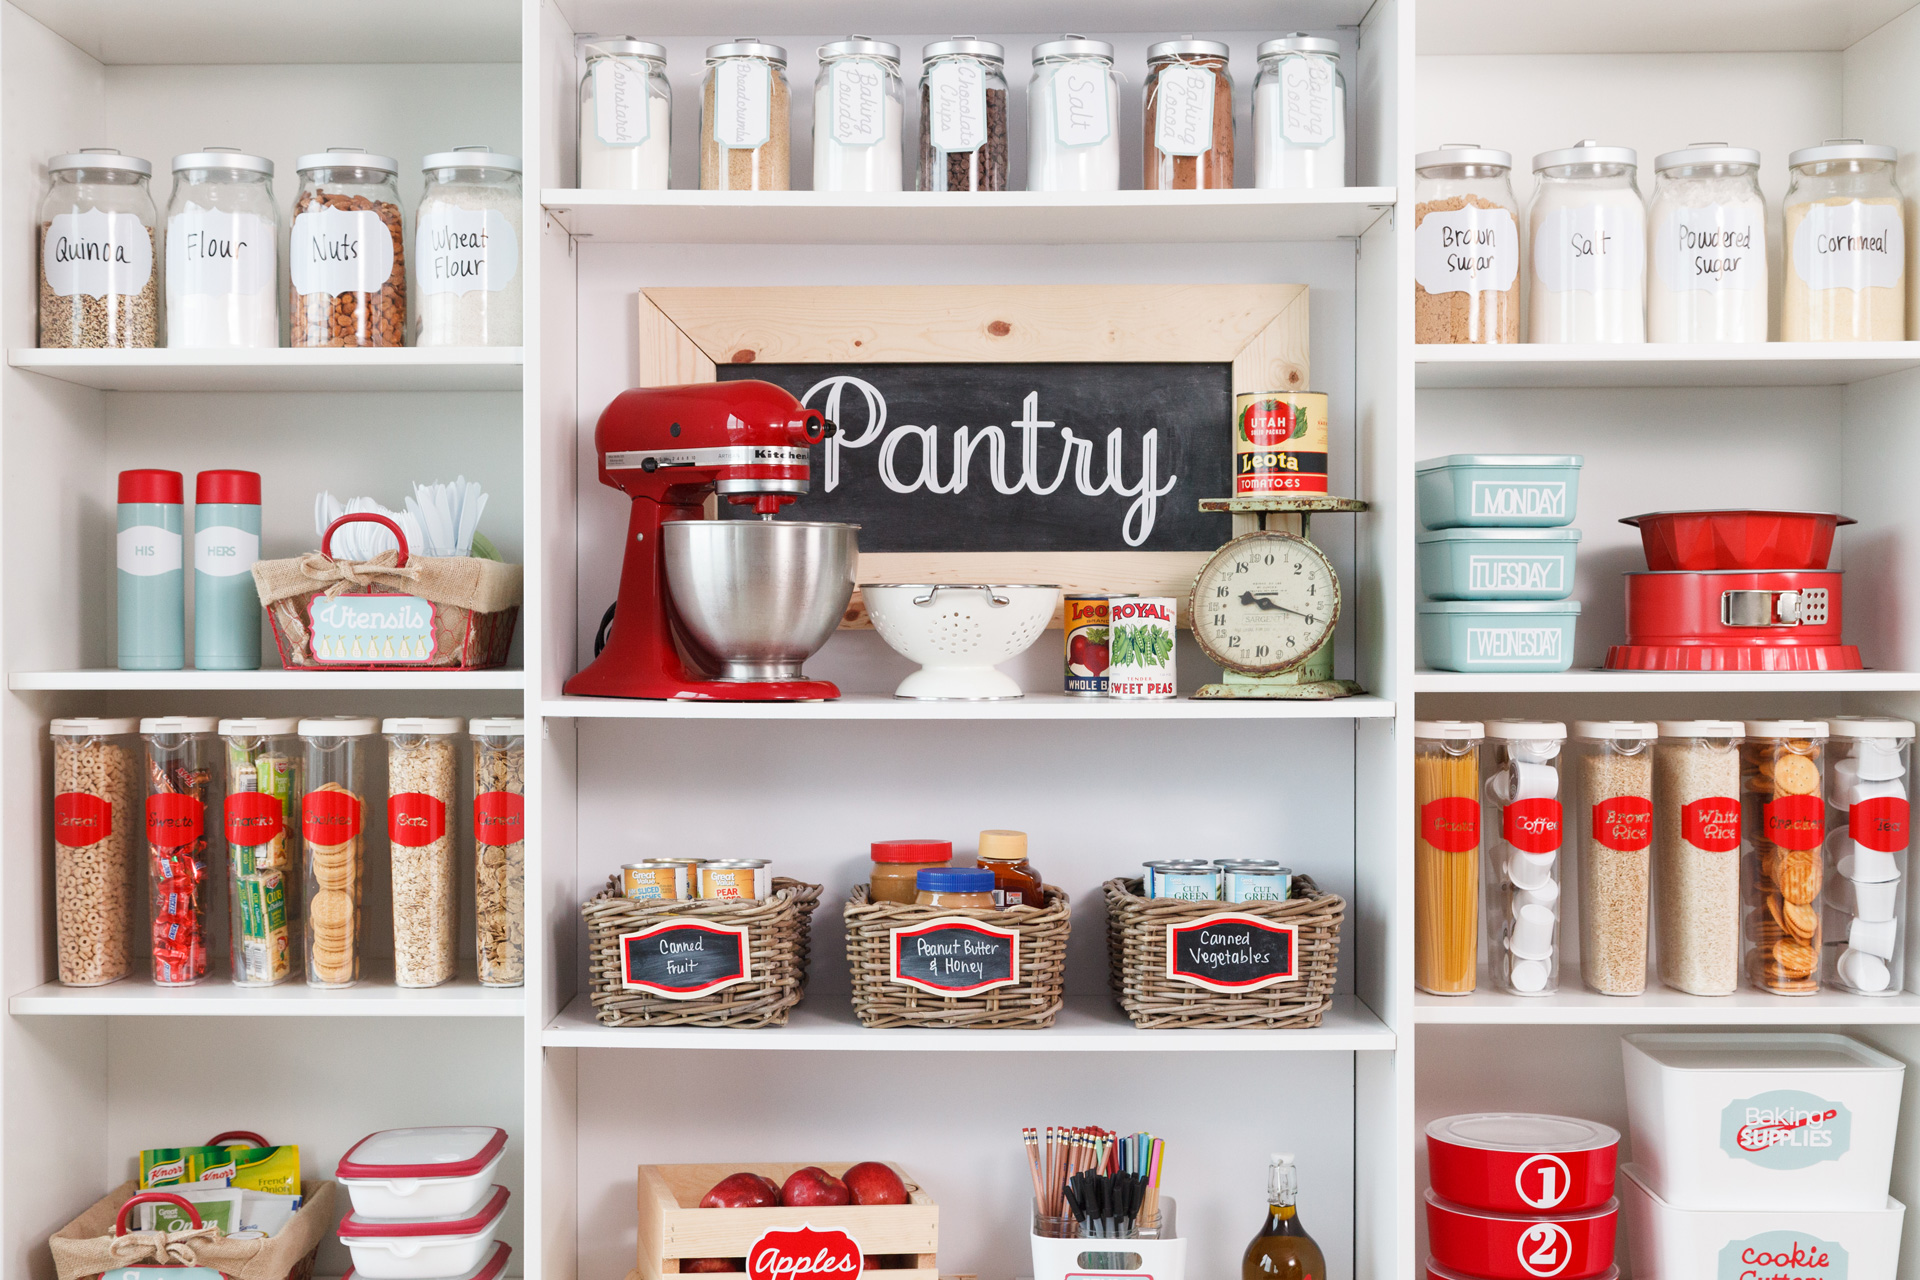 Pantry and laundry room organization inspiration from Design Space